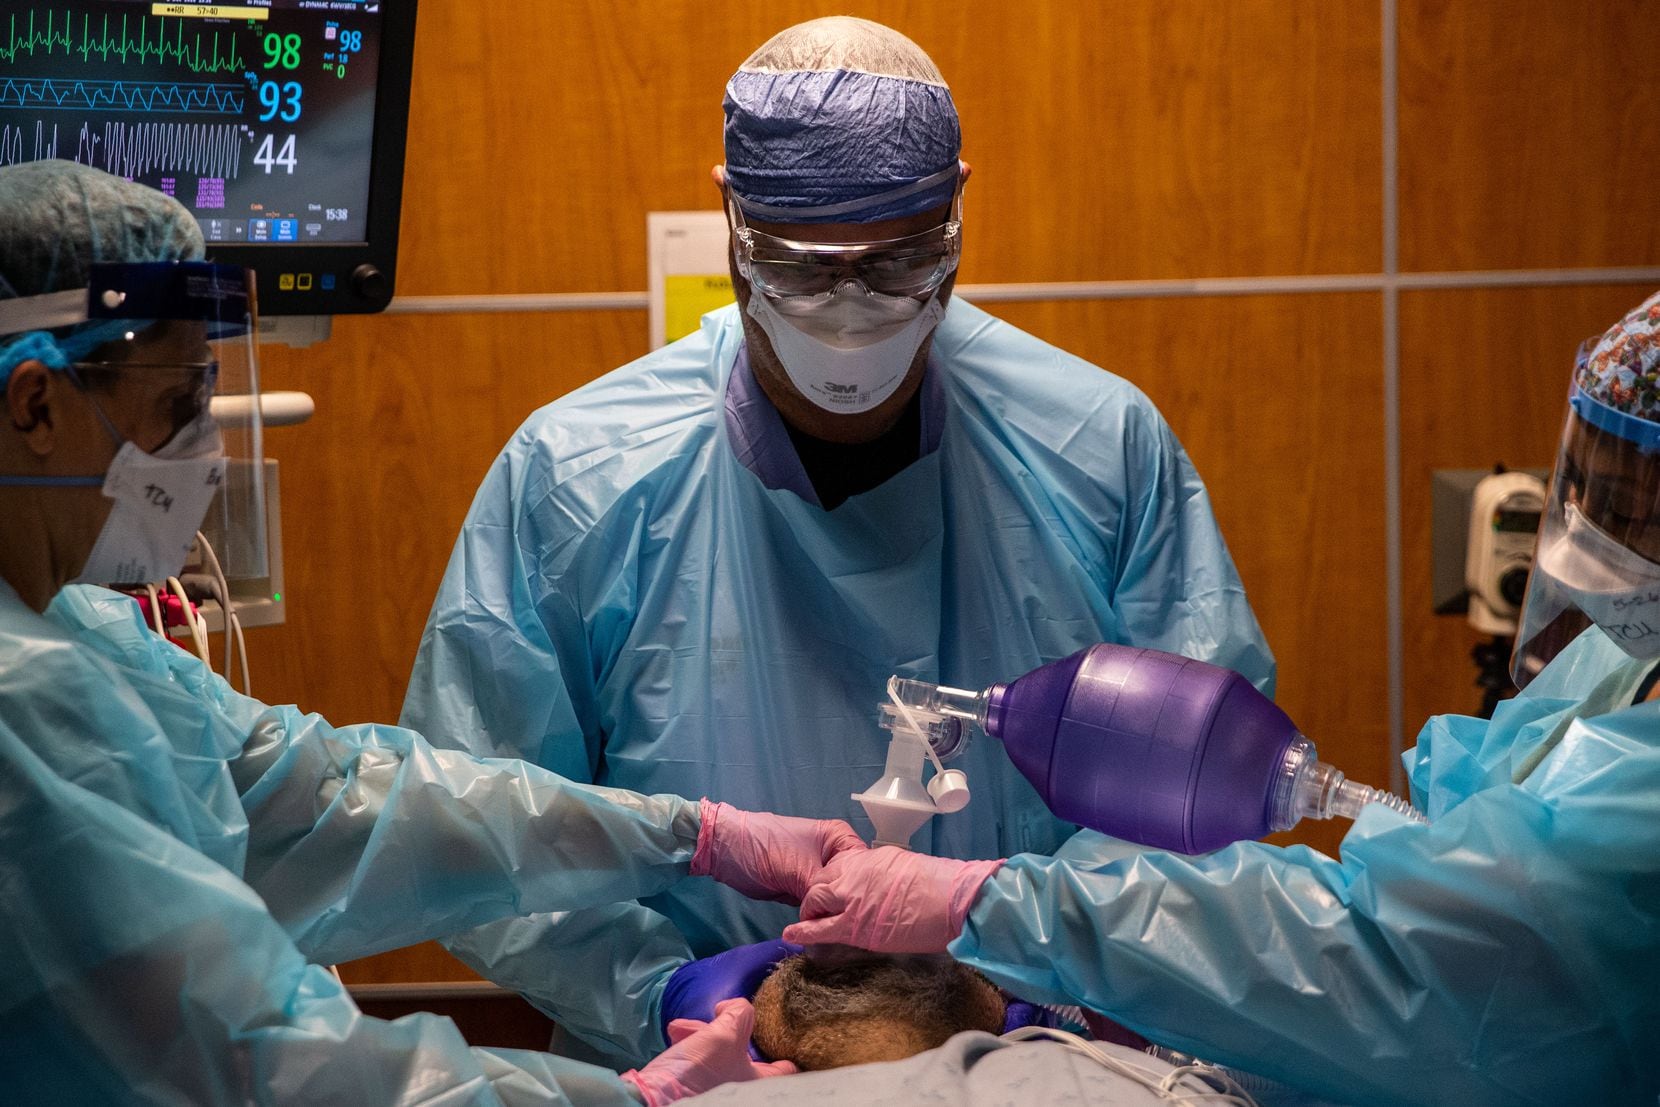 Respiratory therapist Ellen Tabor (right) and certified registered nurse anesthetists Brooke Andrews (left) and Robb Ivy prepare to intubate a COVID-19 patient. The decision to put a patient on a ventilator involves weighing a number of risks, but in the case of this man, his heart was becoming dangerously stressed by his breathing difficulties.
